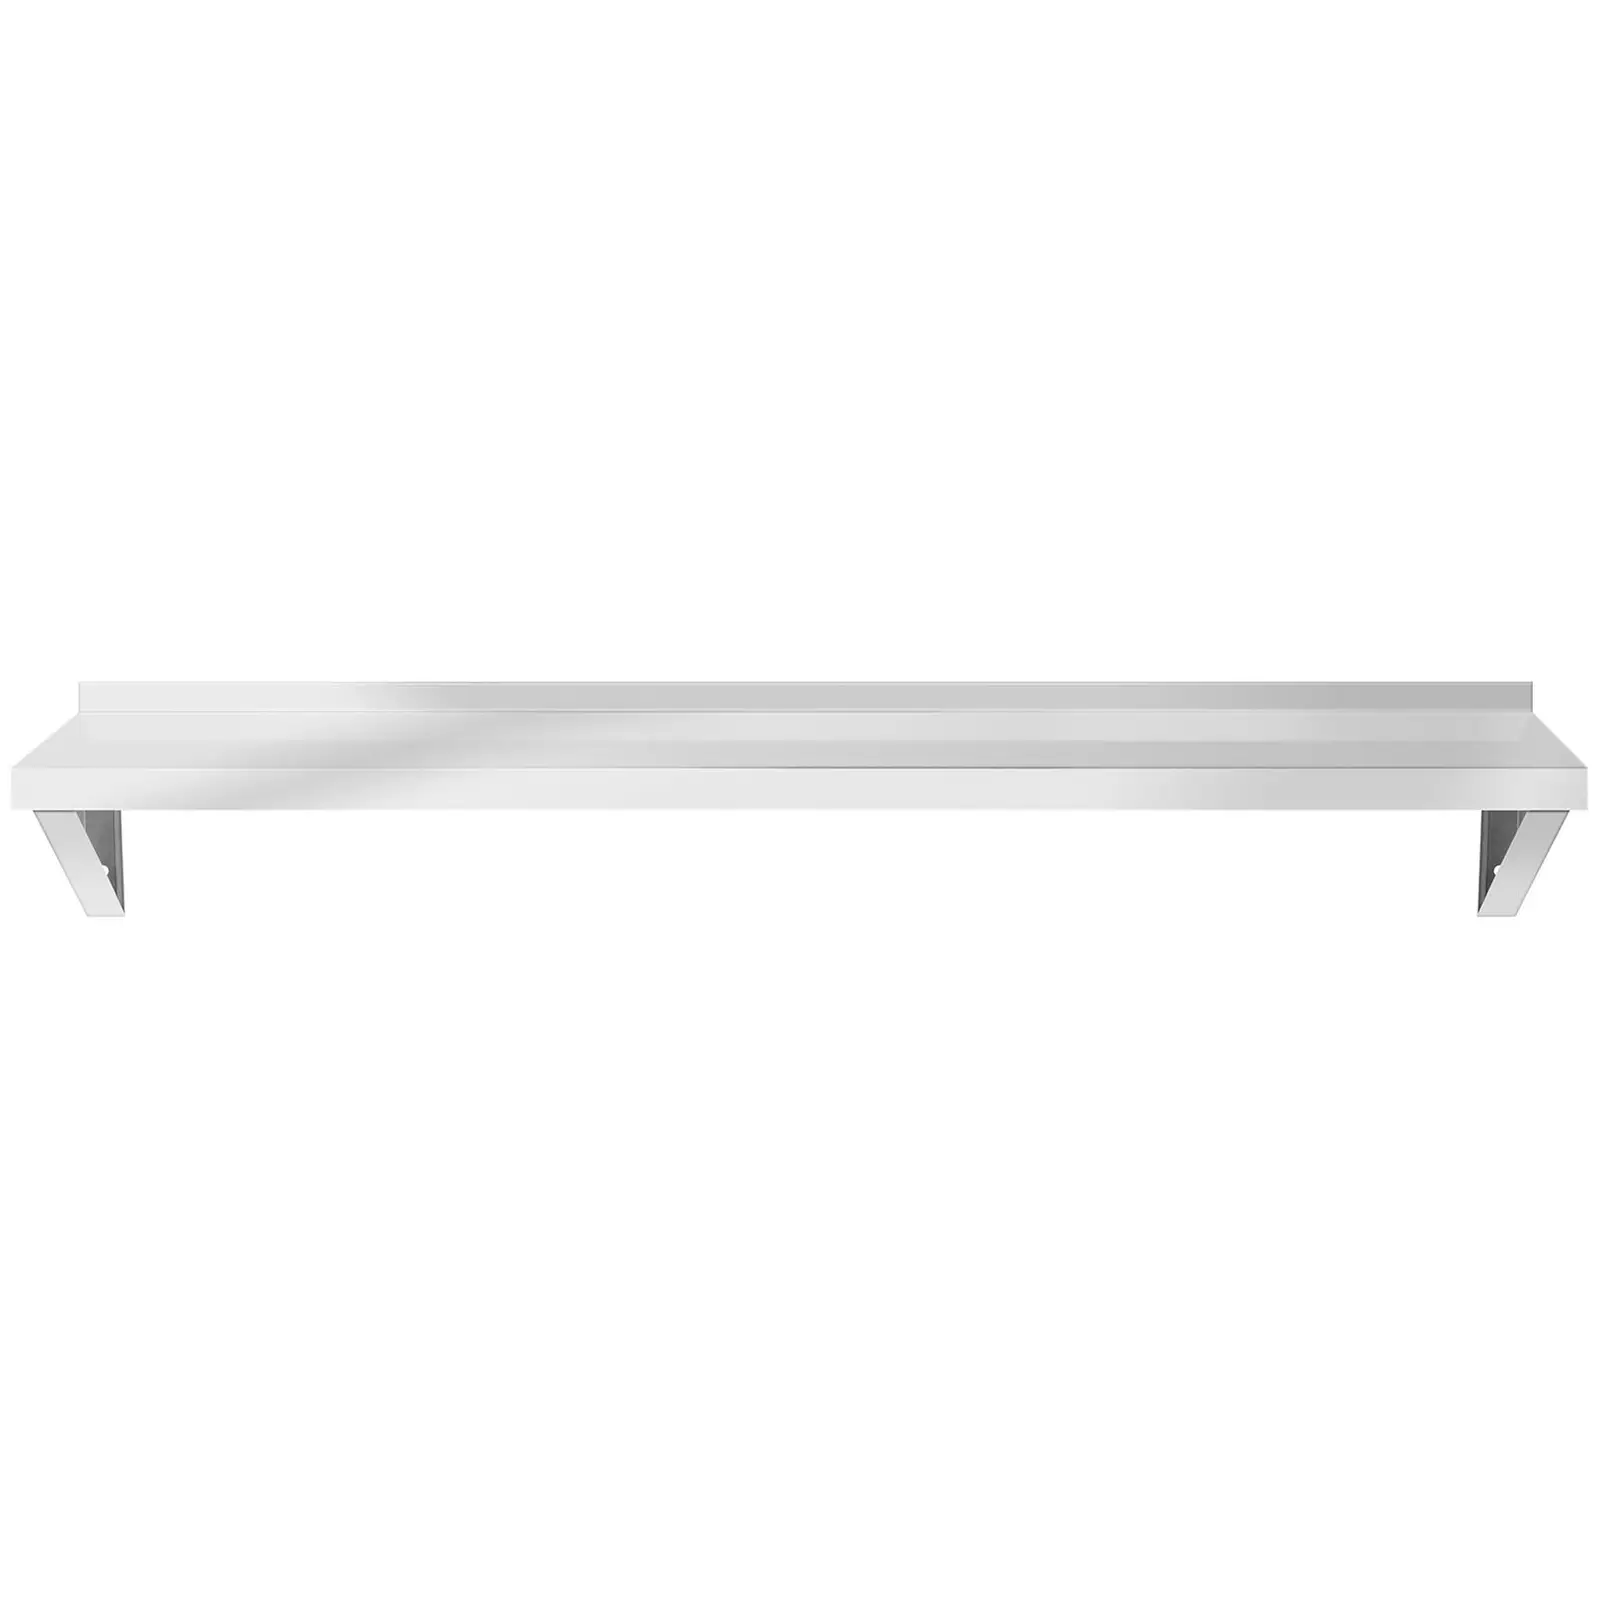 Wall Shelf - stainless steel - 150 x 40 cm - up to 80 kg - Royal Catering